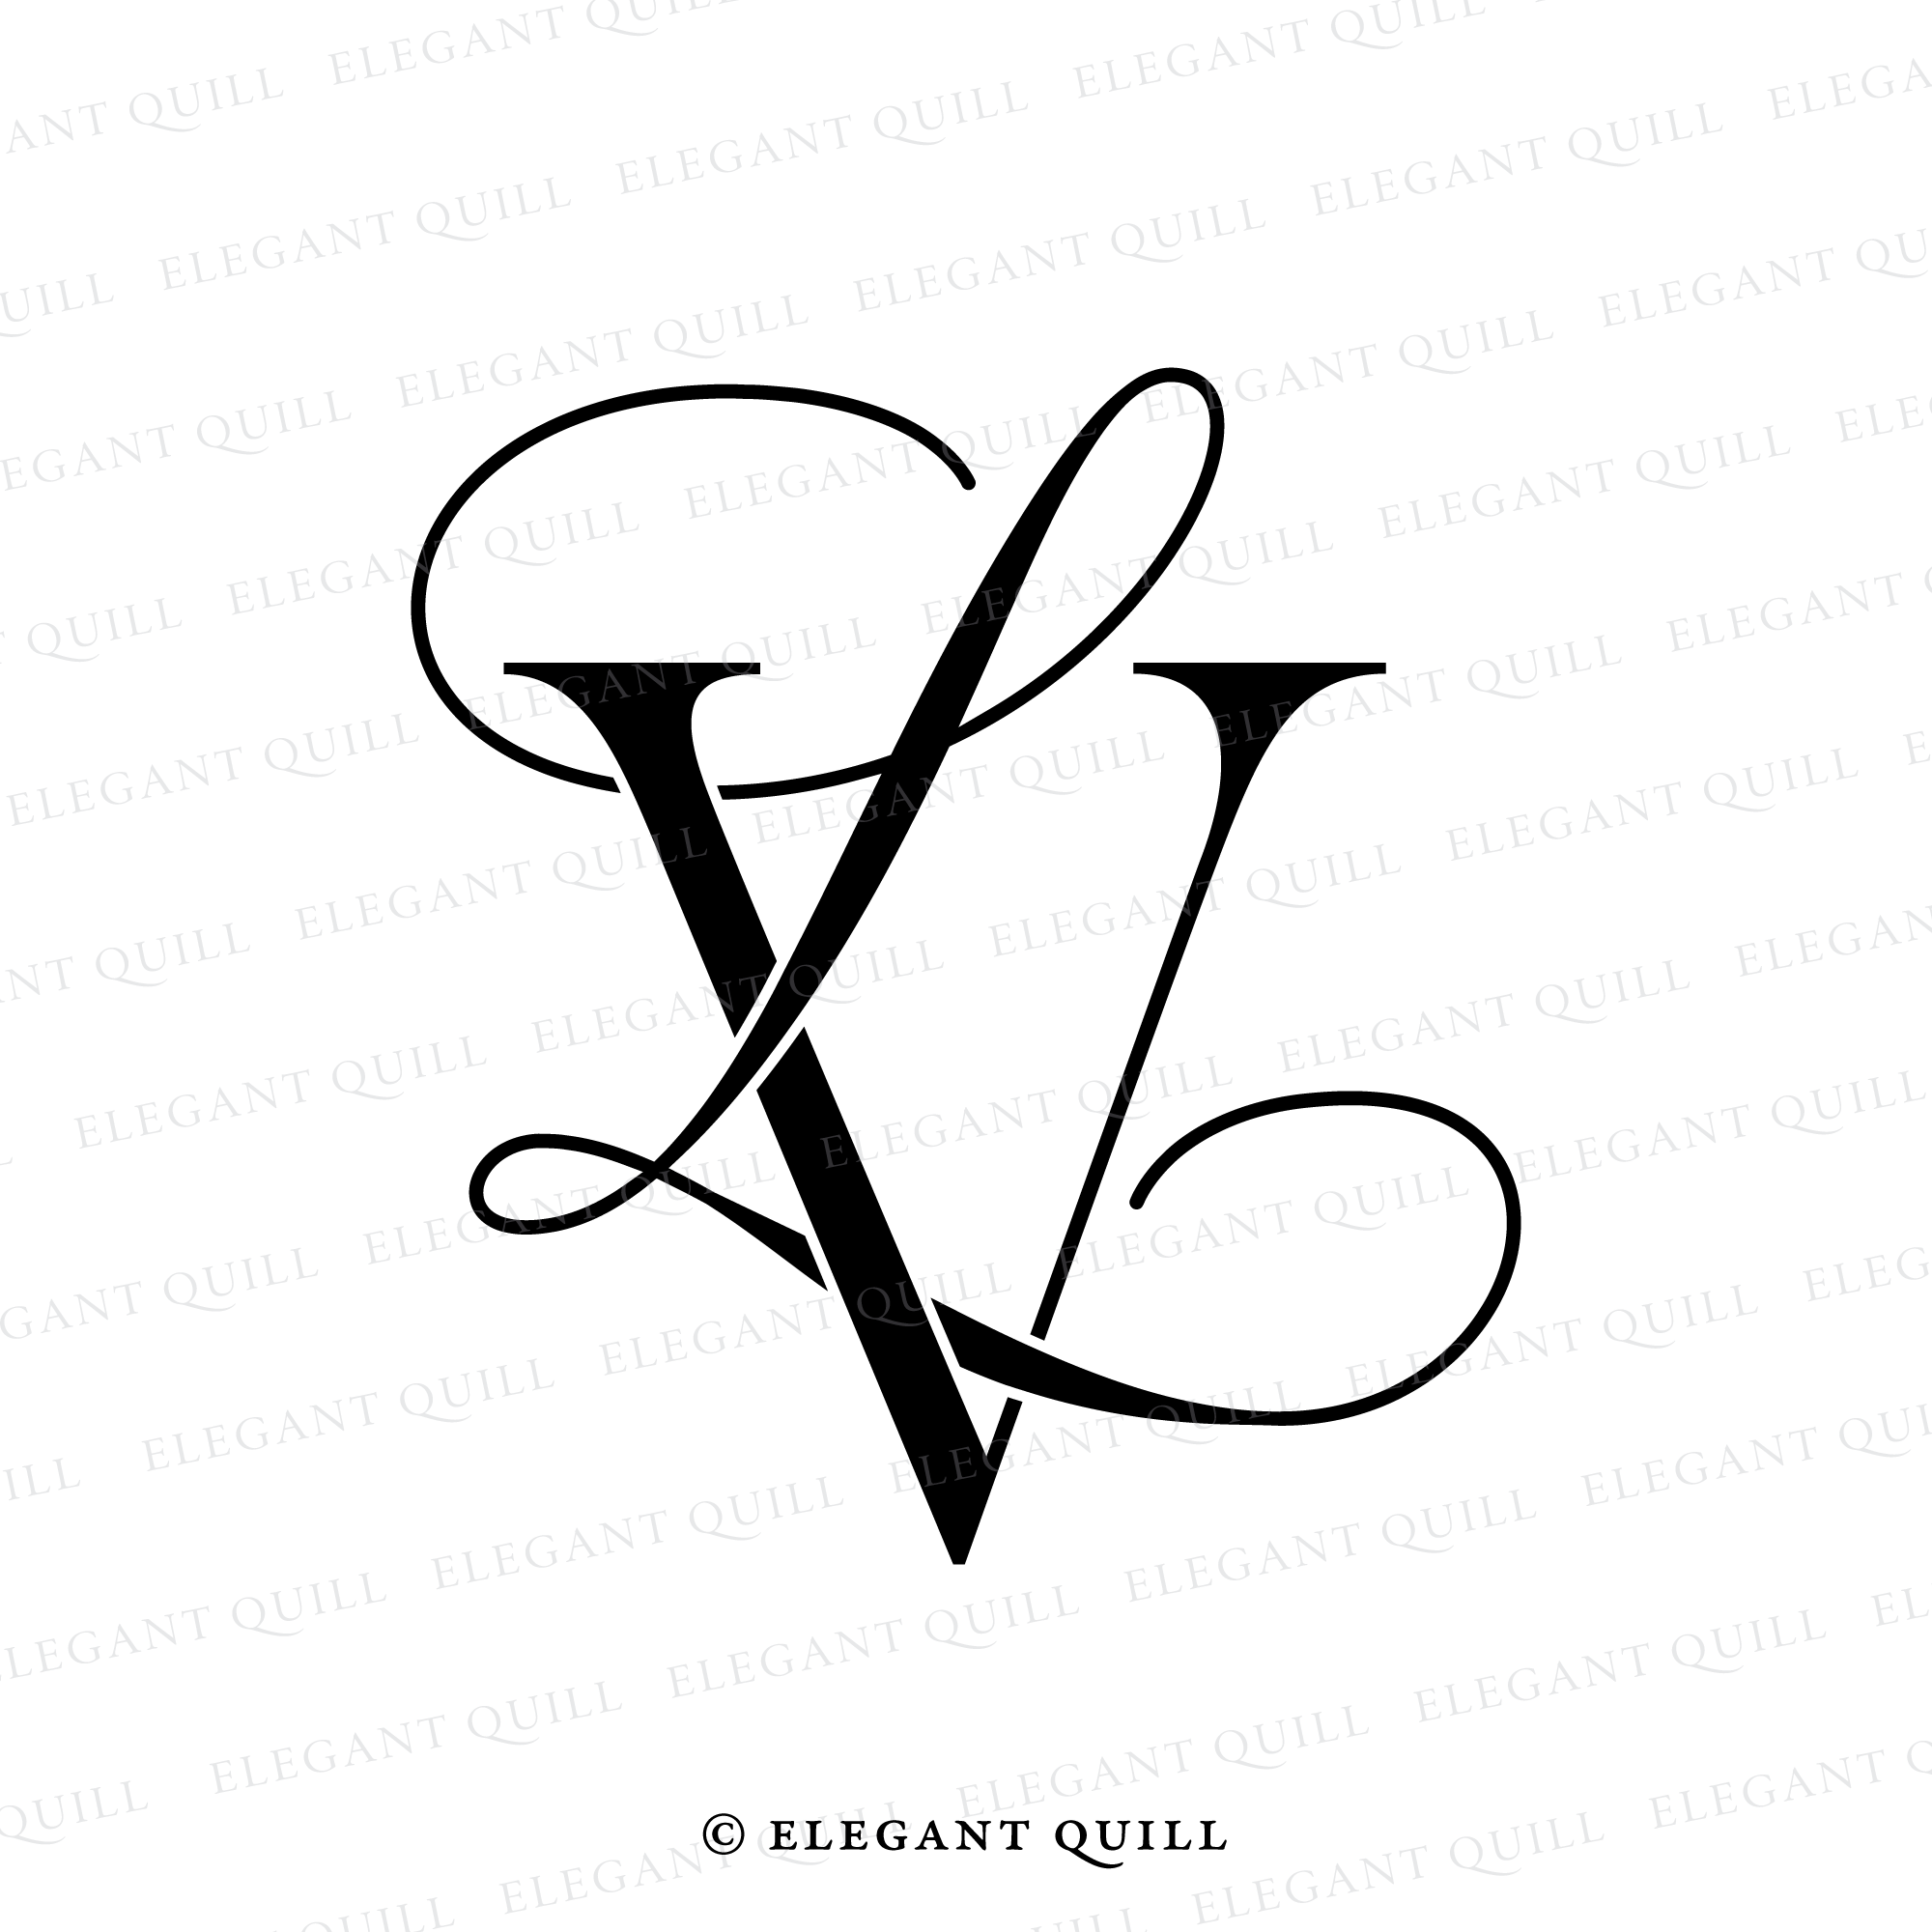 Initial Letter Logo LV Gold And White Color, With Stamp And Circle